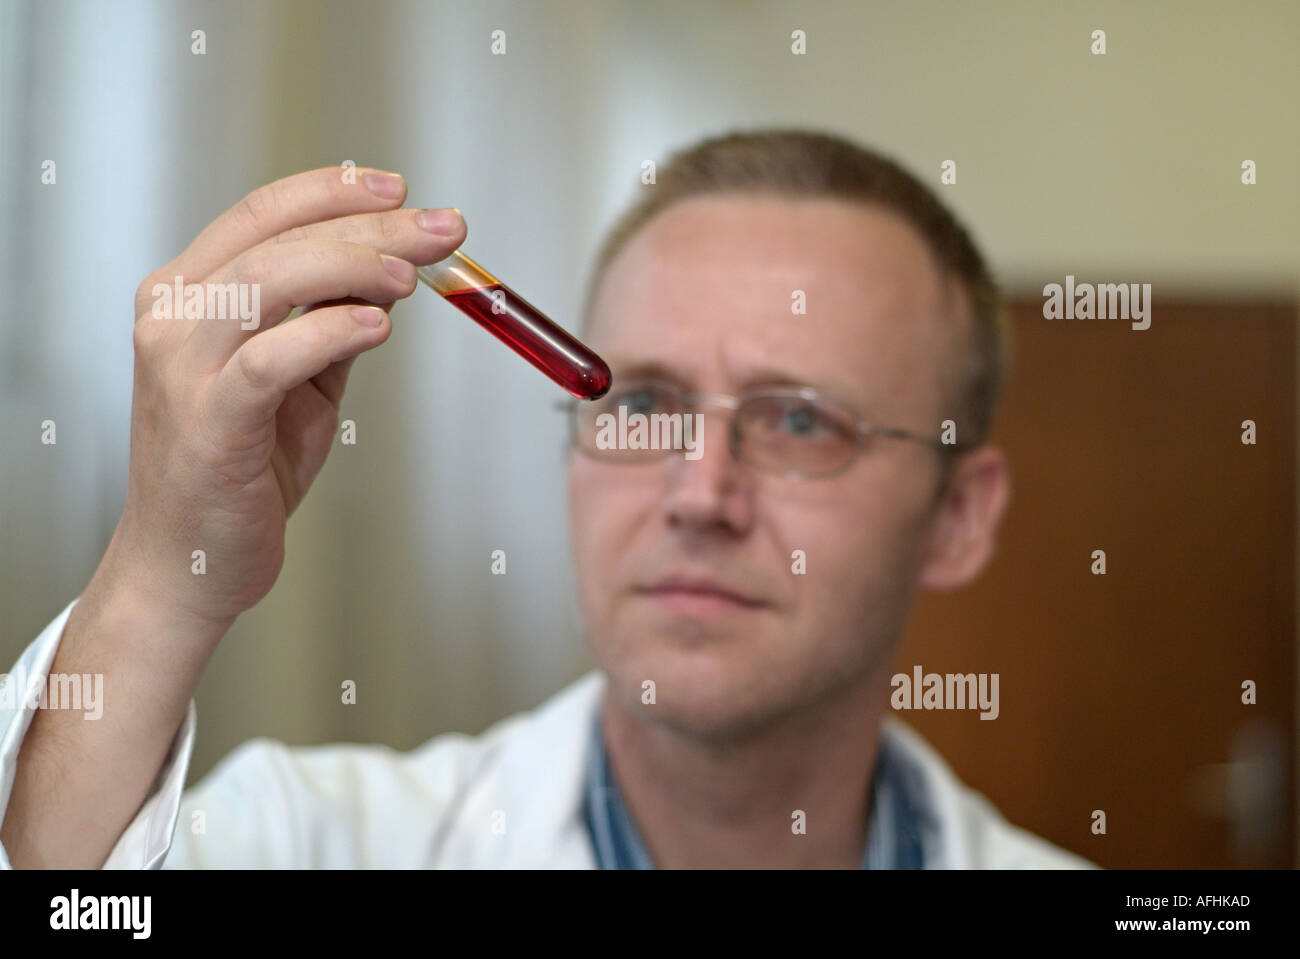 Scientist Studying the Content of a Test Tube in a Laboratory Stock Photo